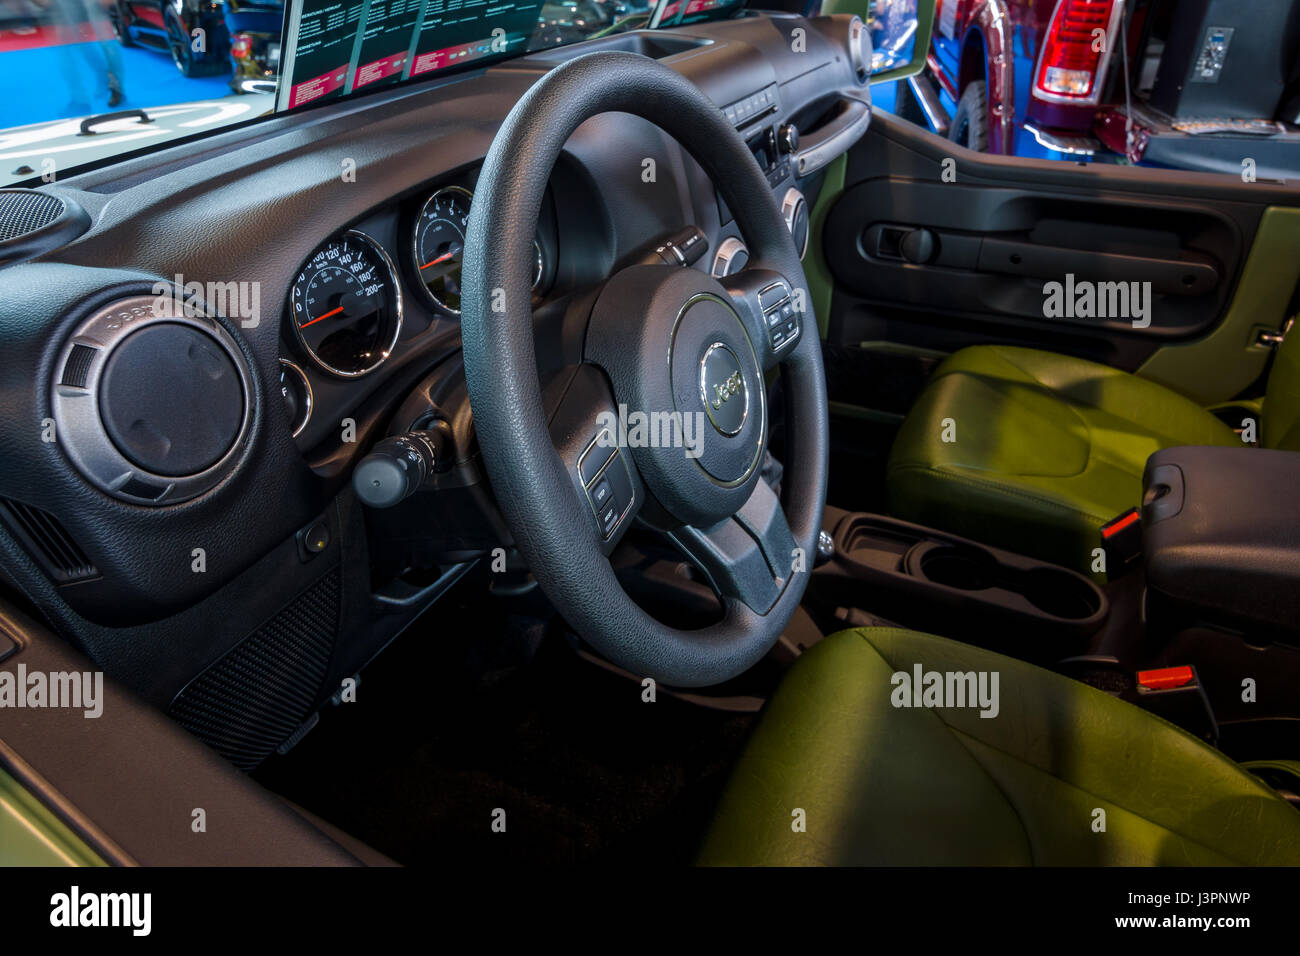 STUTTGART, GERMANY - MARCH 03, 2017: Interior of a compact SUV Jeep Wrangler (US Army), 2017. Europe's greatest classic car exhibition 'RETRO CLASSICS' Stock Photo